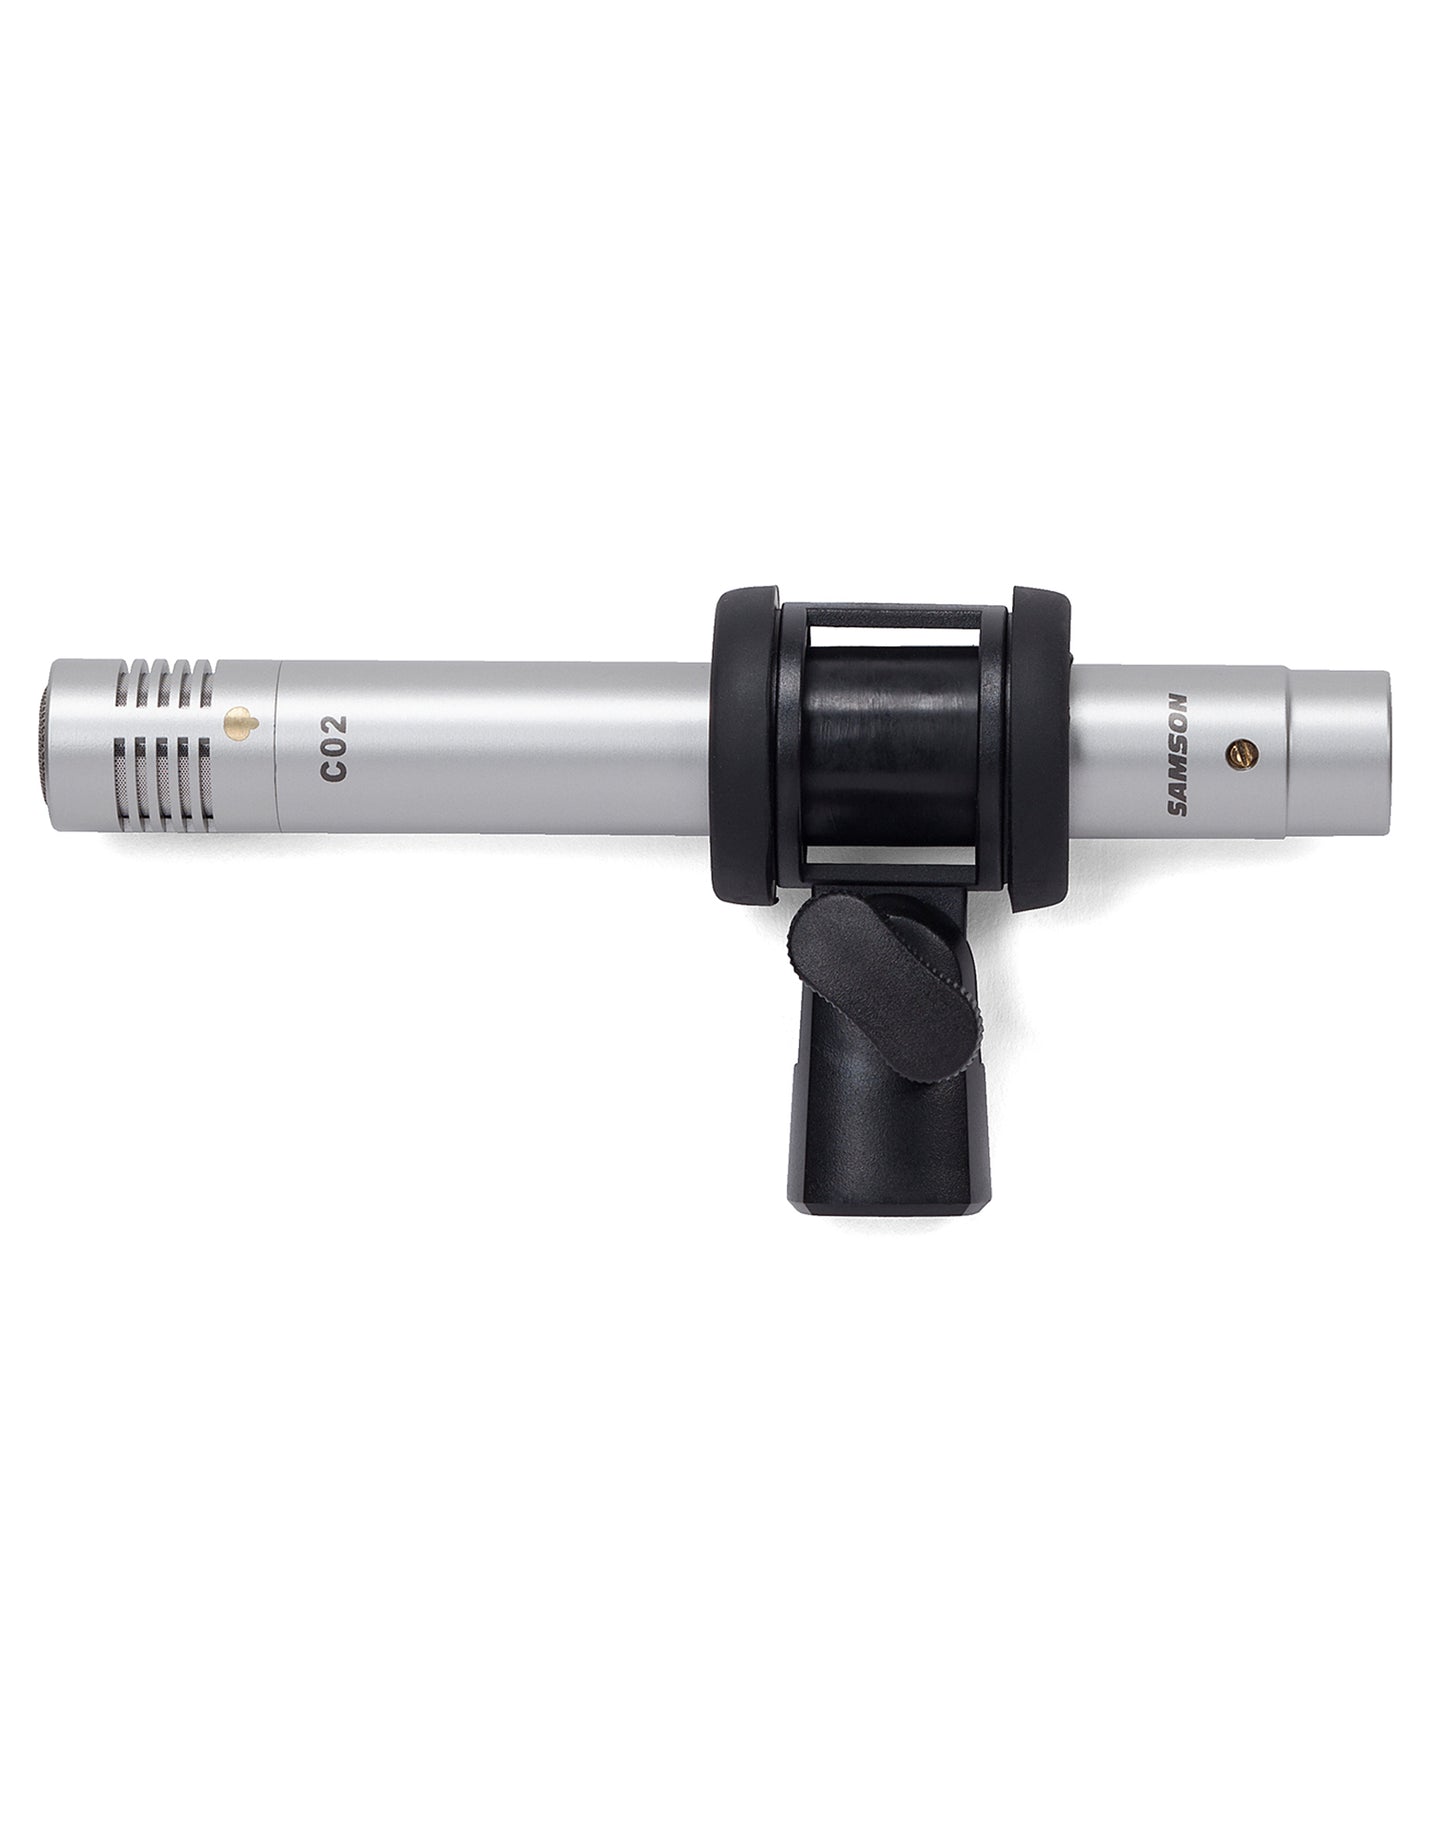 Samson C02 Pencil Cardioid Condenser Microphones with Gold Plated XLR Connectors (Available in Single and in Pair) for Studio, Recordings, Acoustics